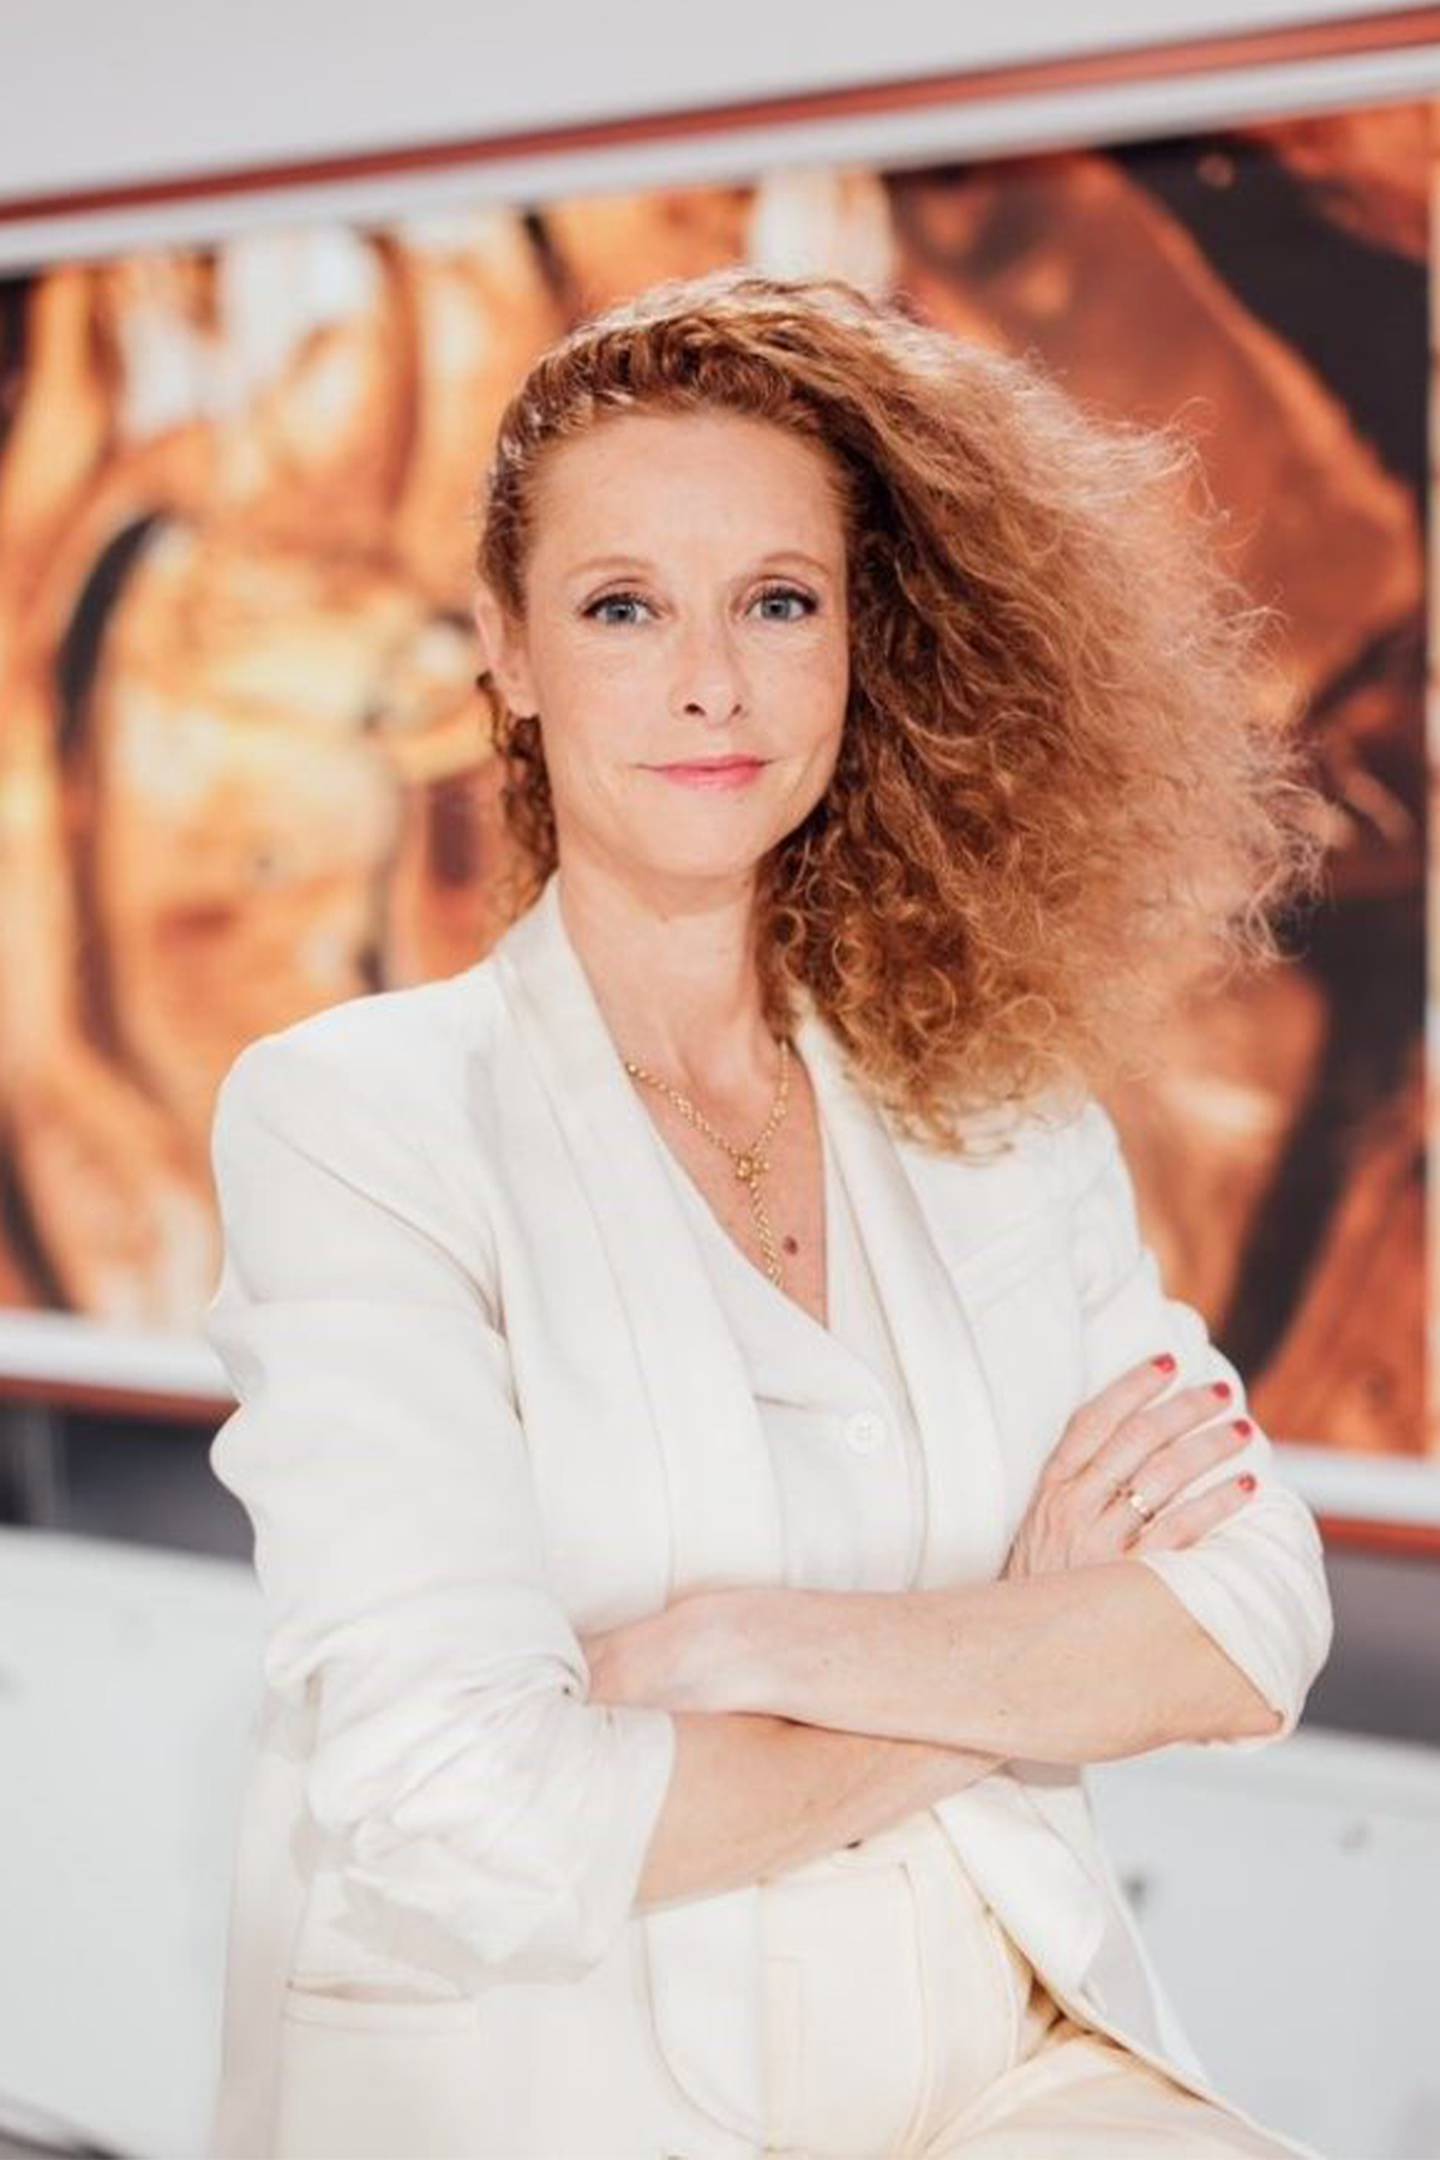 Cécile Lochard - chief sustainability officer at Guerlain.